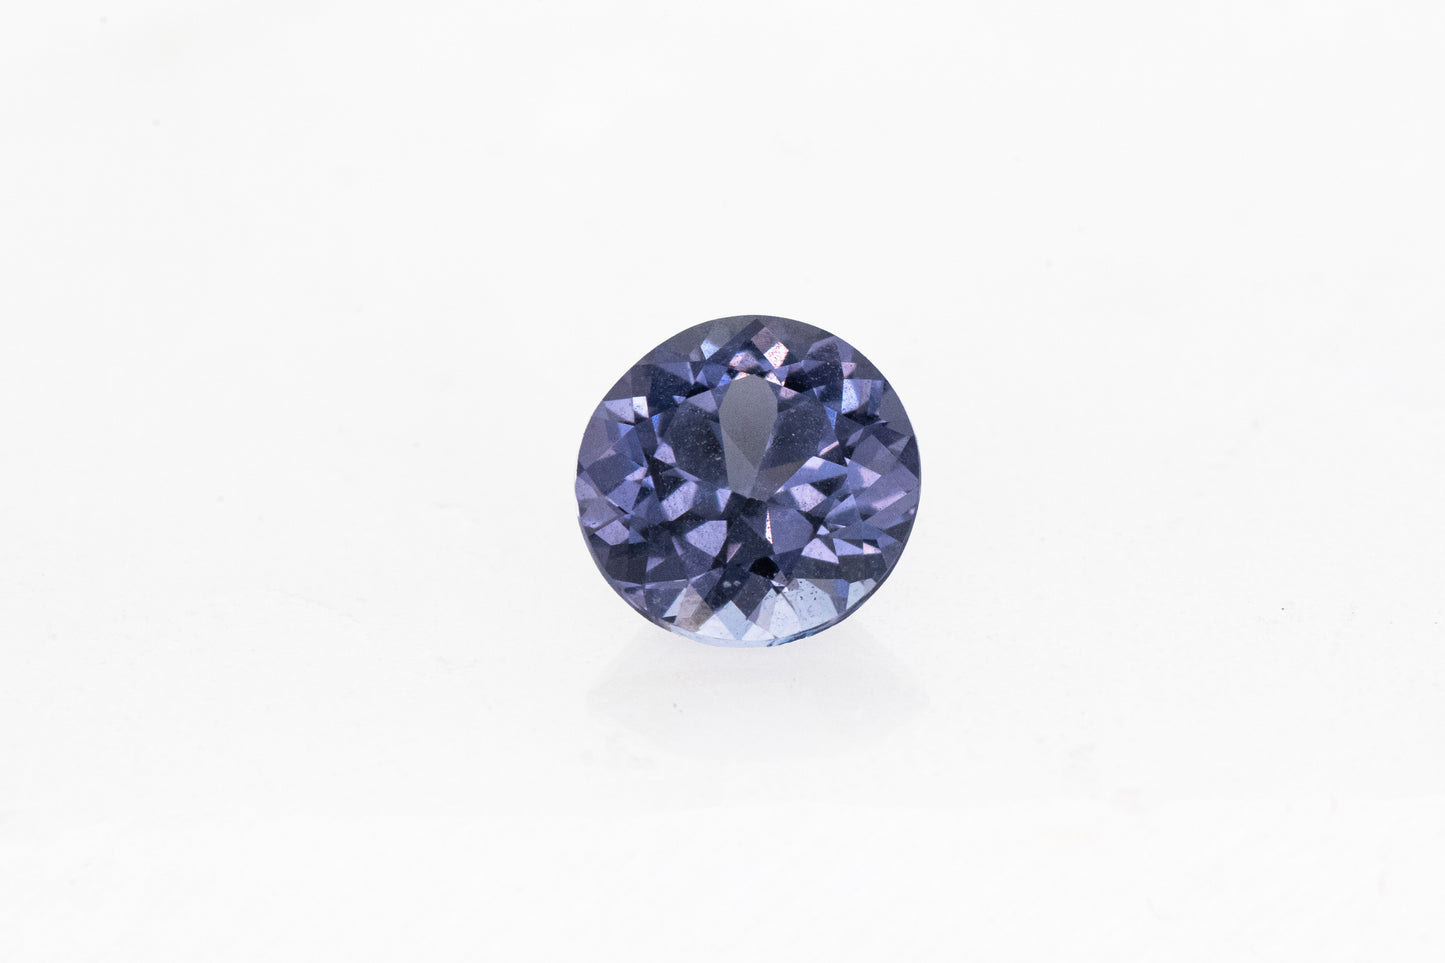 A handmade Blue Spinel Cassin jewelry on a white background.